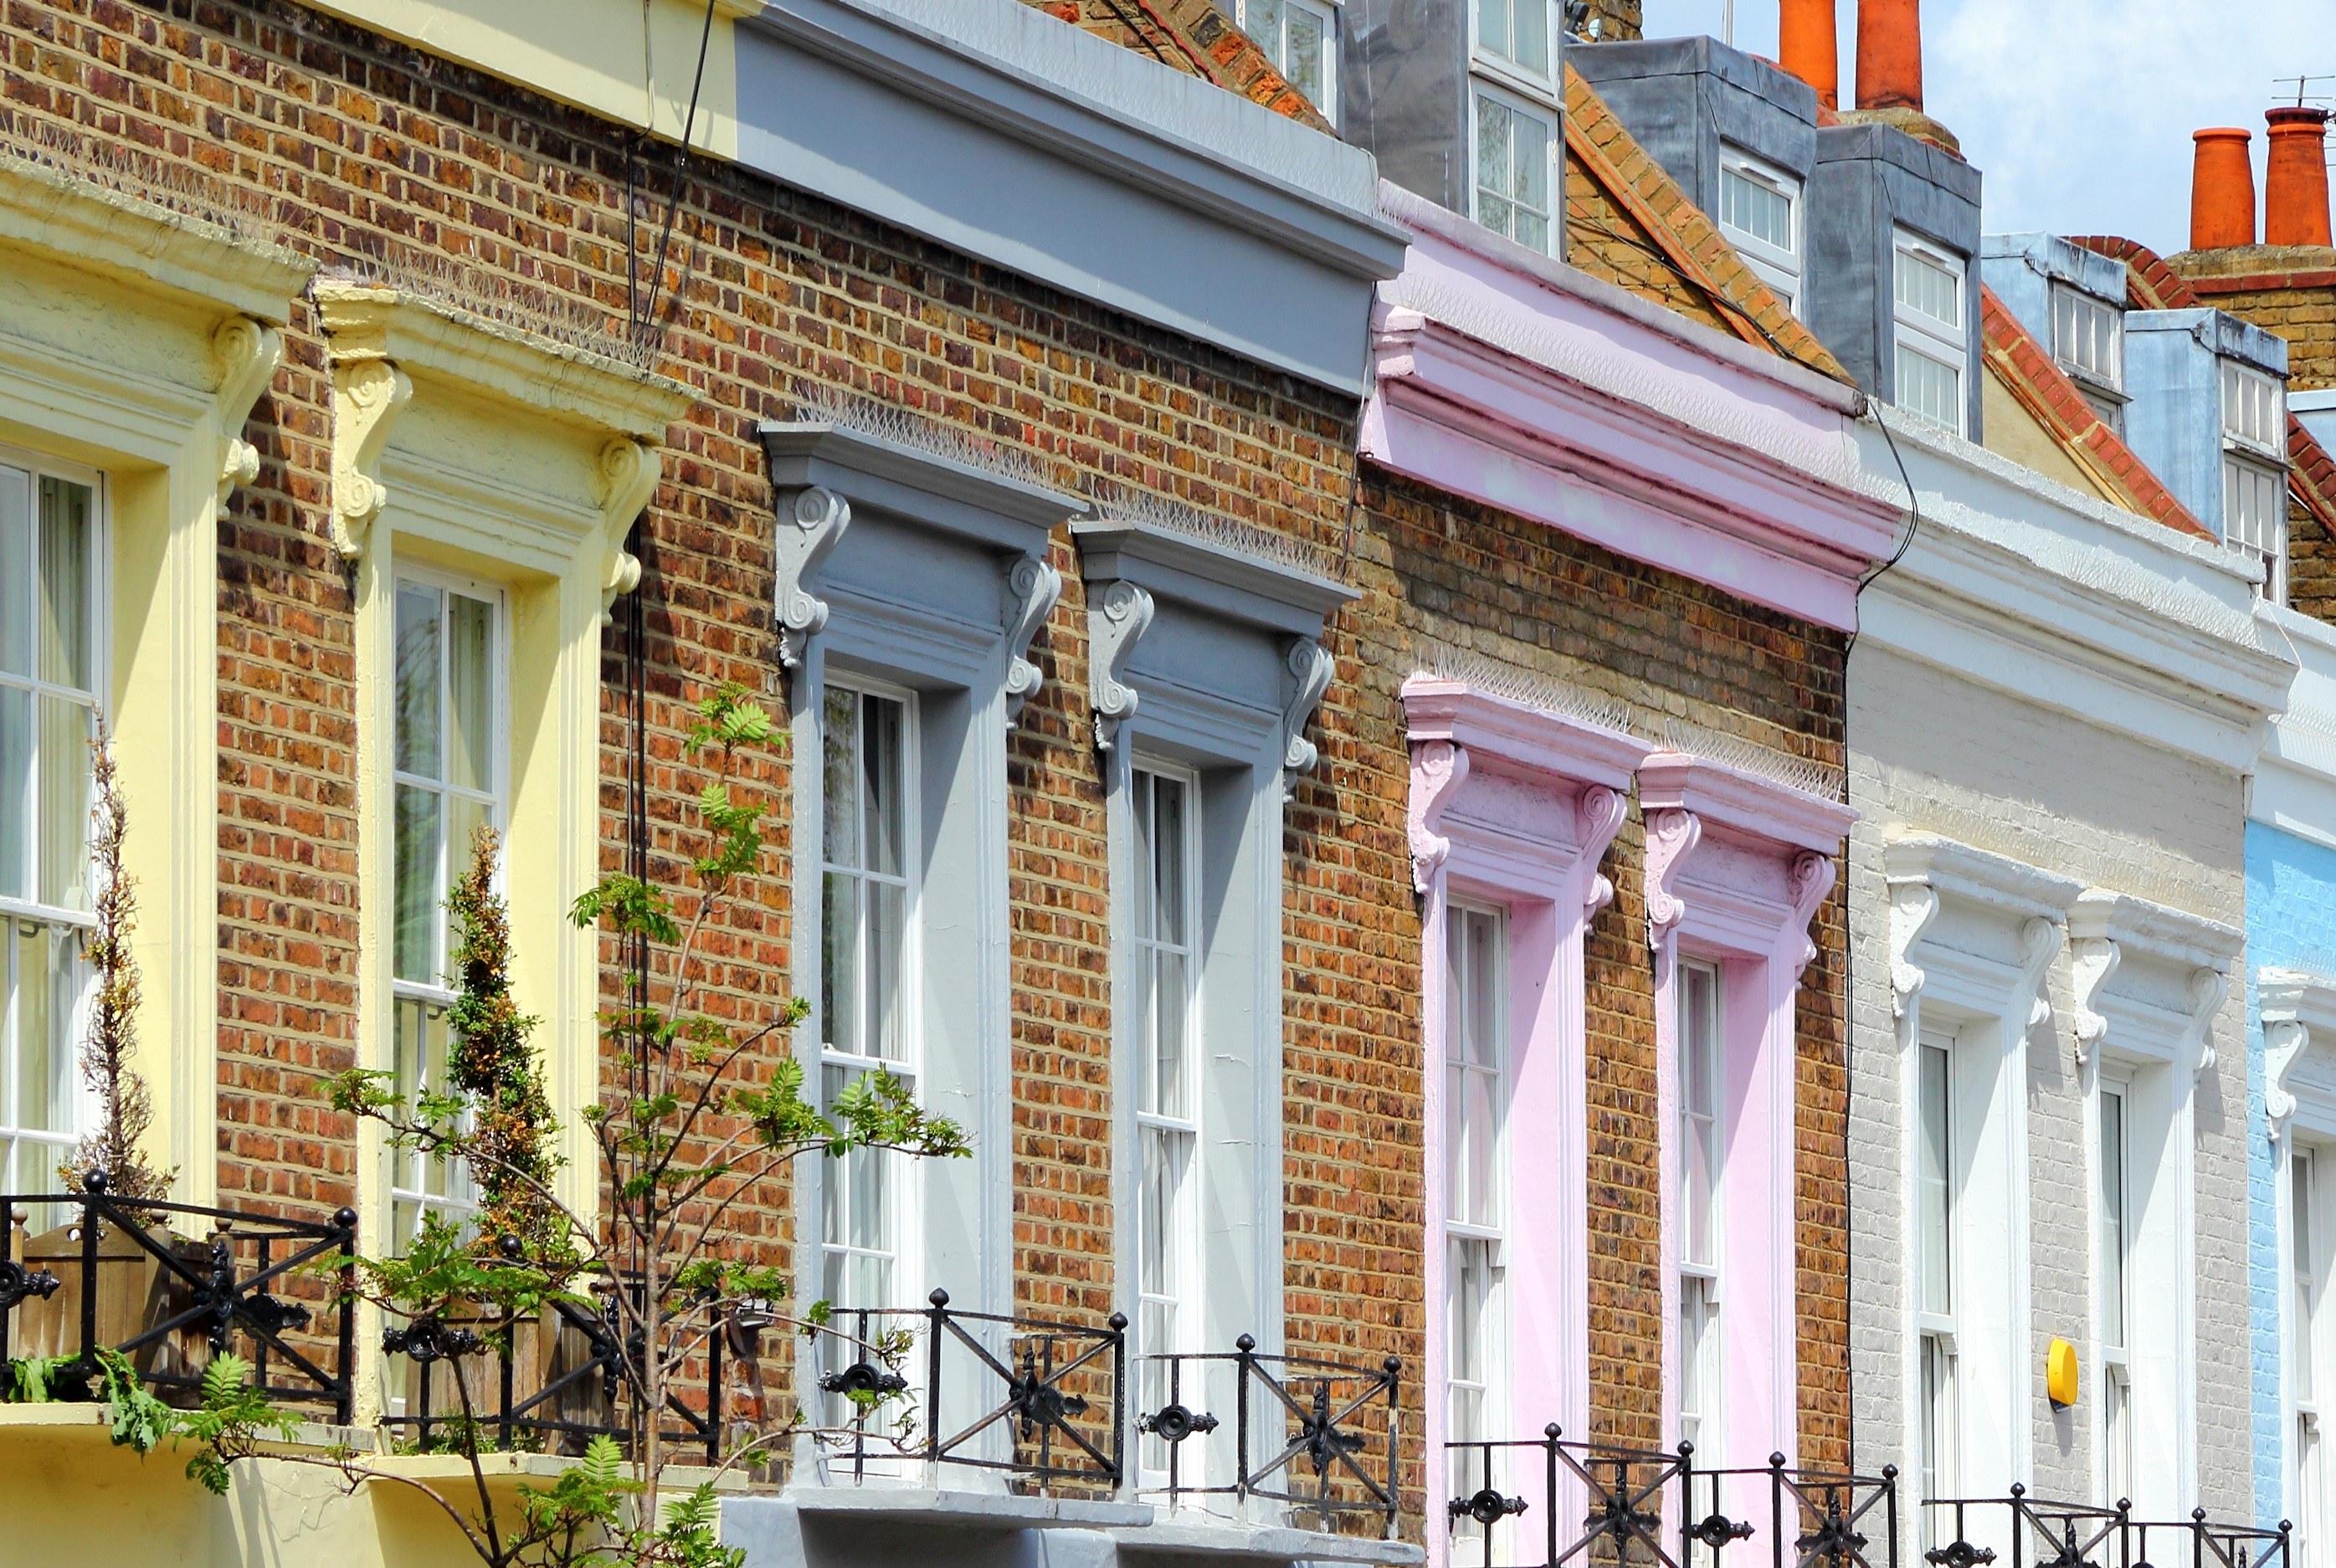 Product Availability Soars for First-Time Landlords